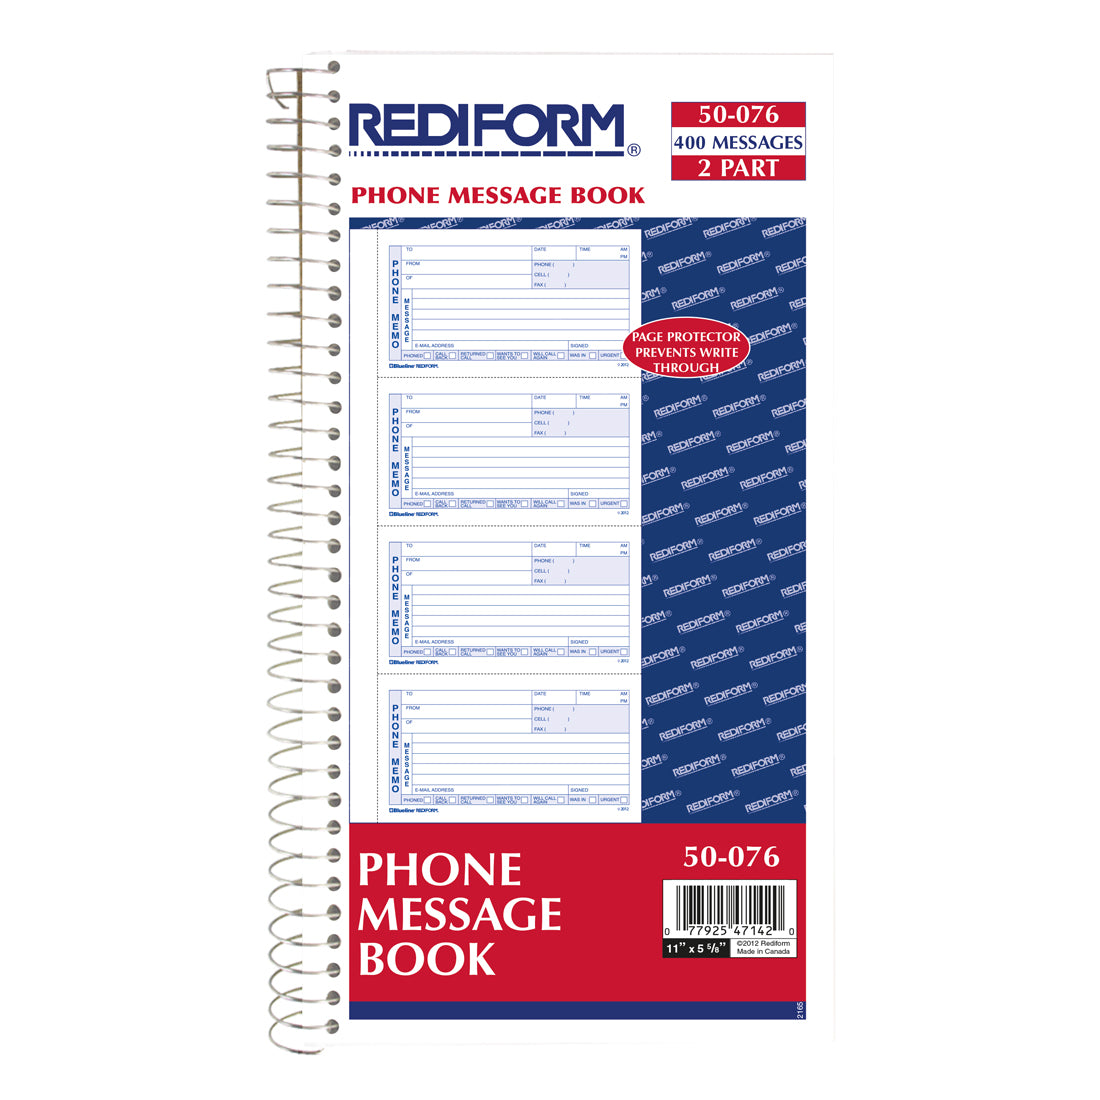 Telephone Message Book 50076